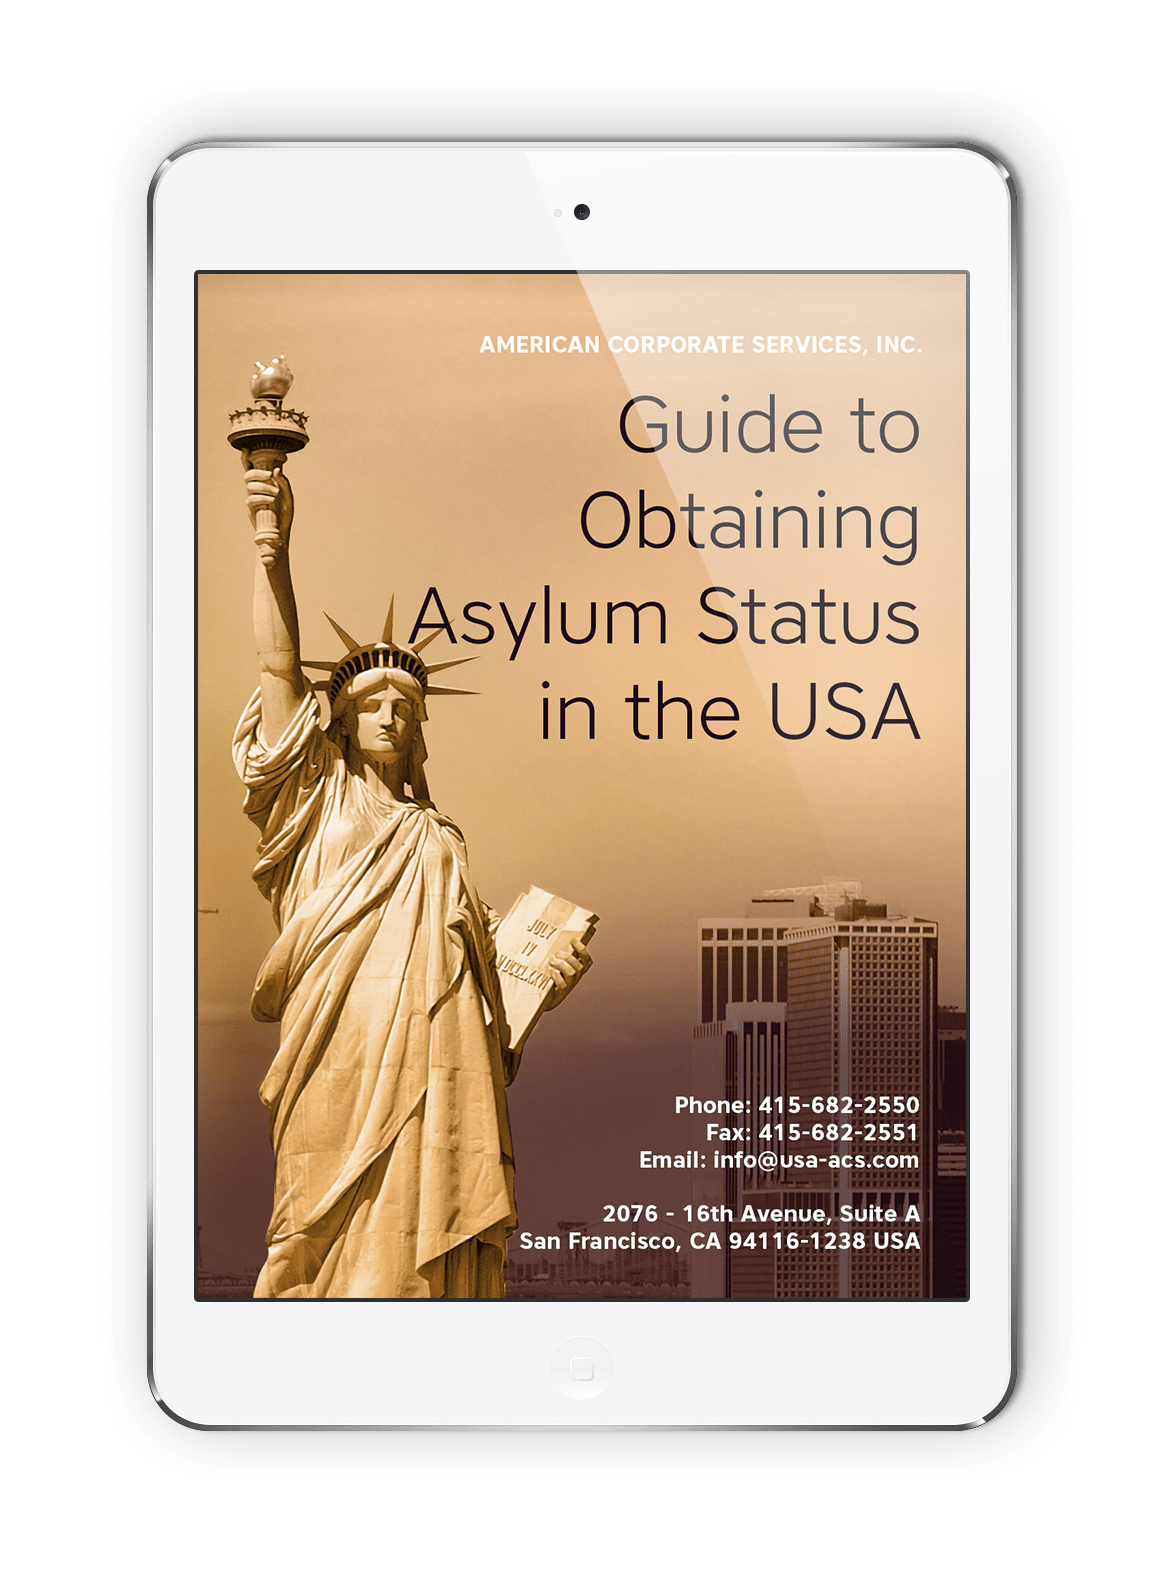 Guide to Obtaining Asylum Status in the USA